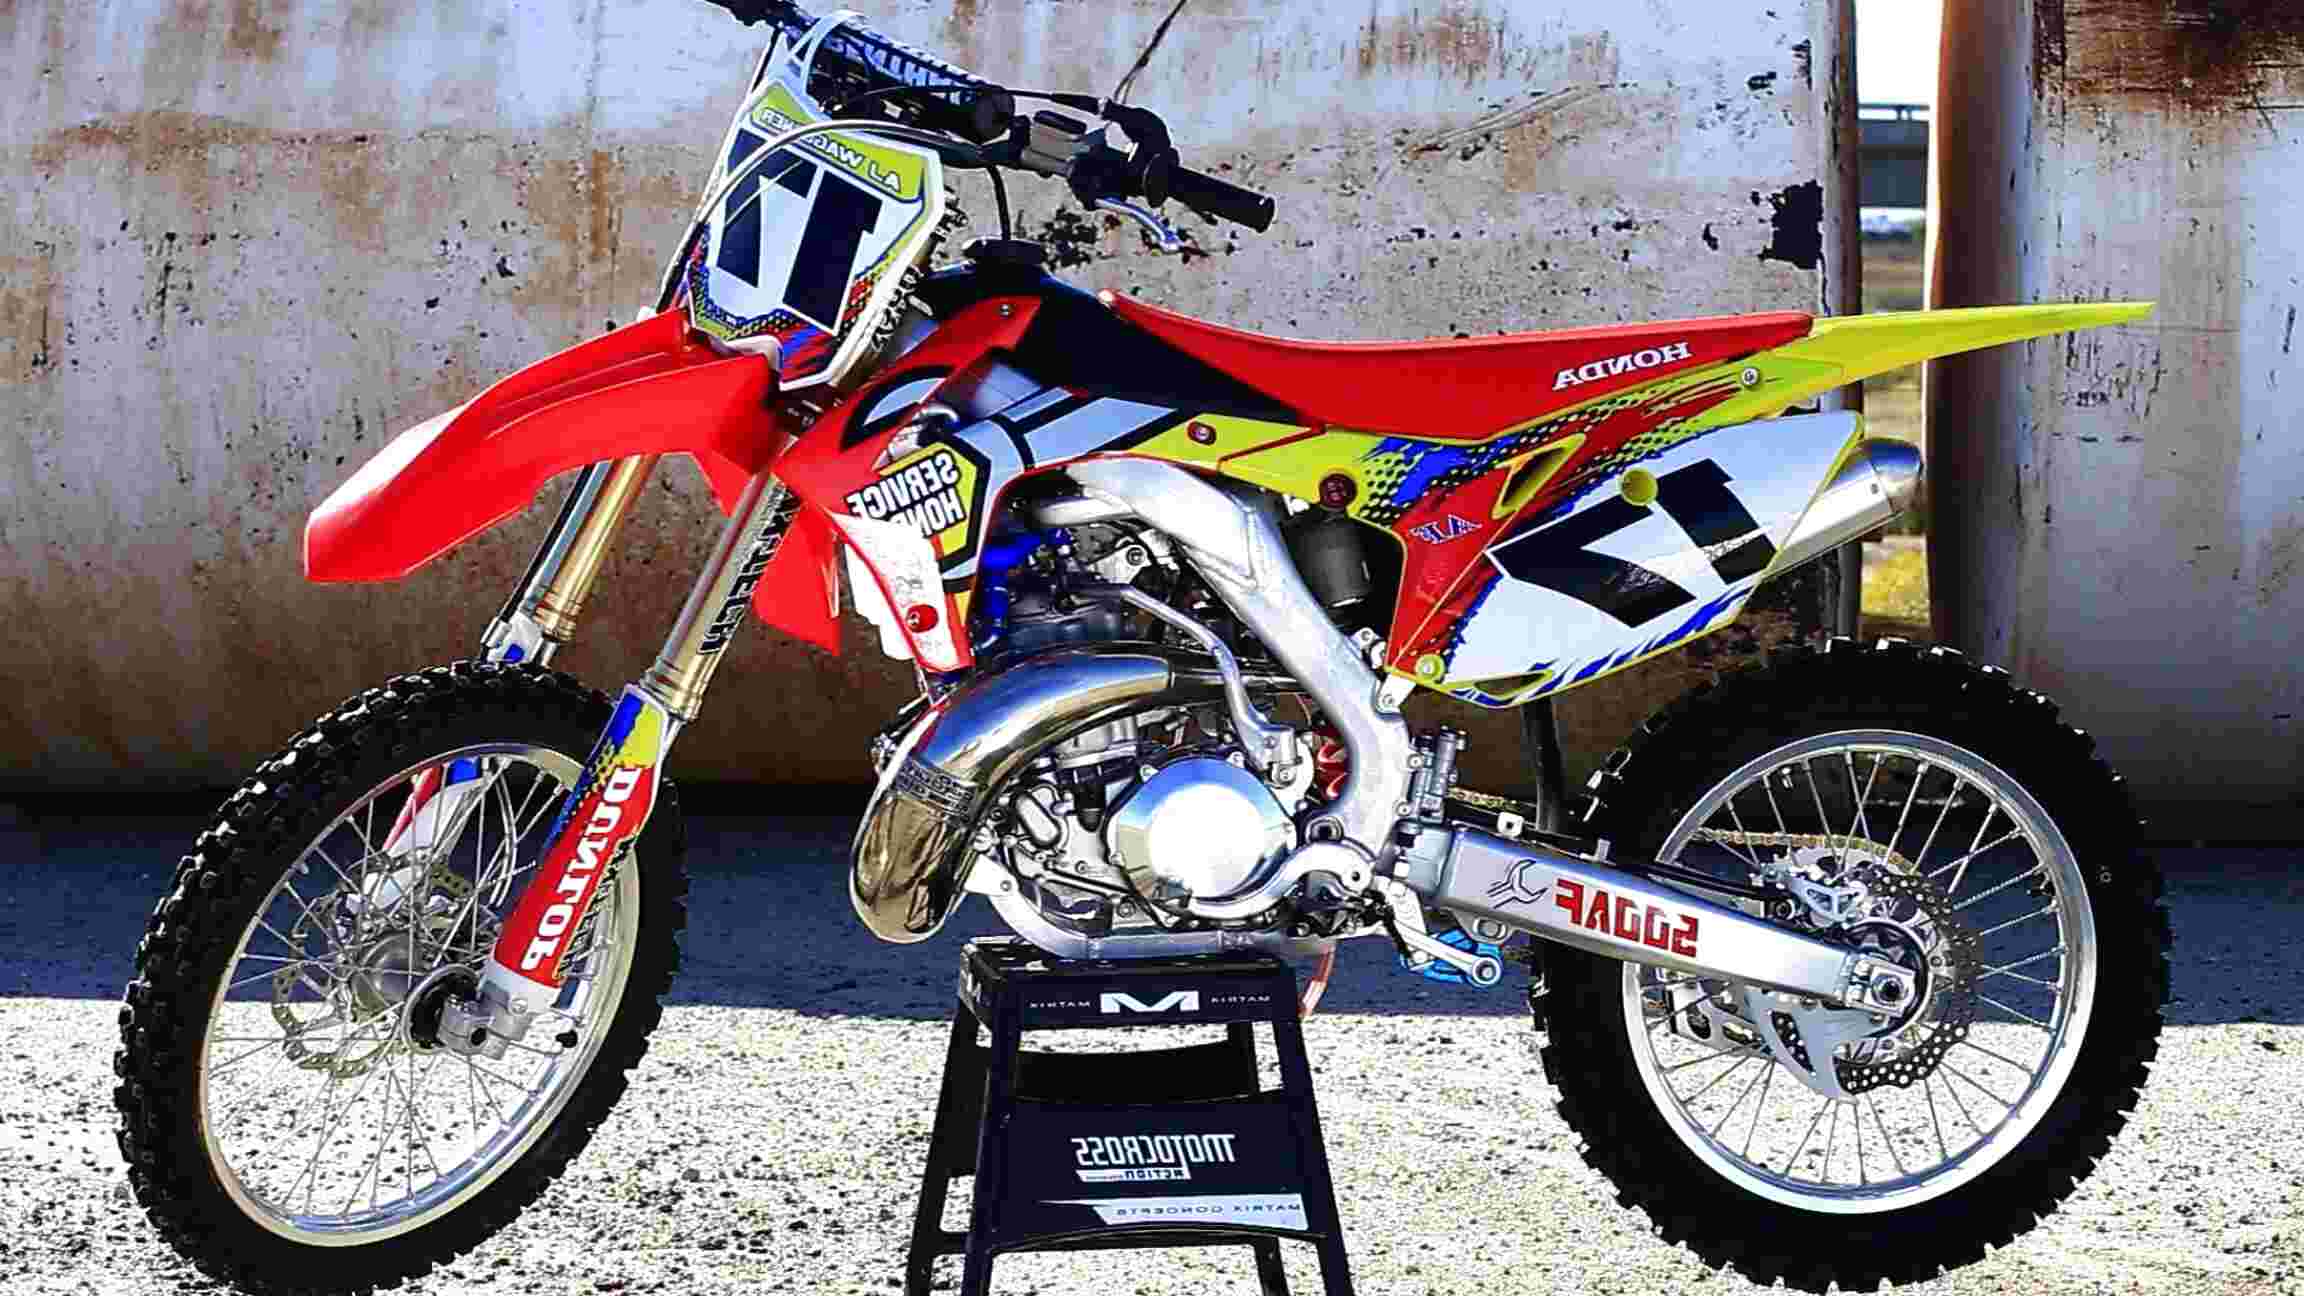 Cr 500 Af for sale in UK | 30 used Cr 500 Afs